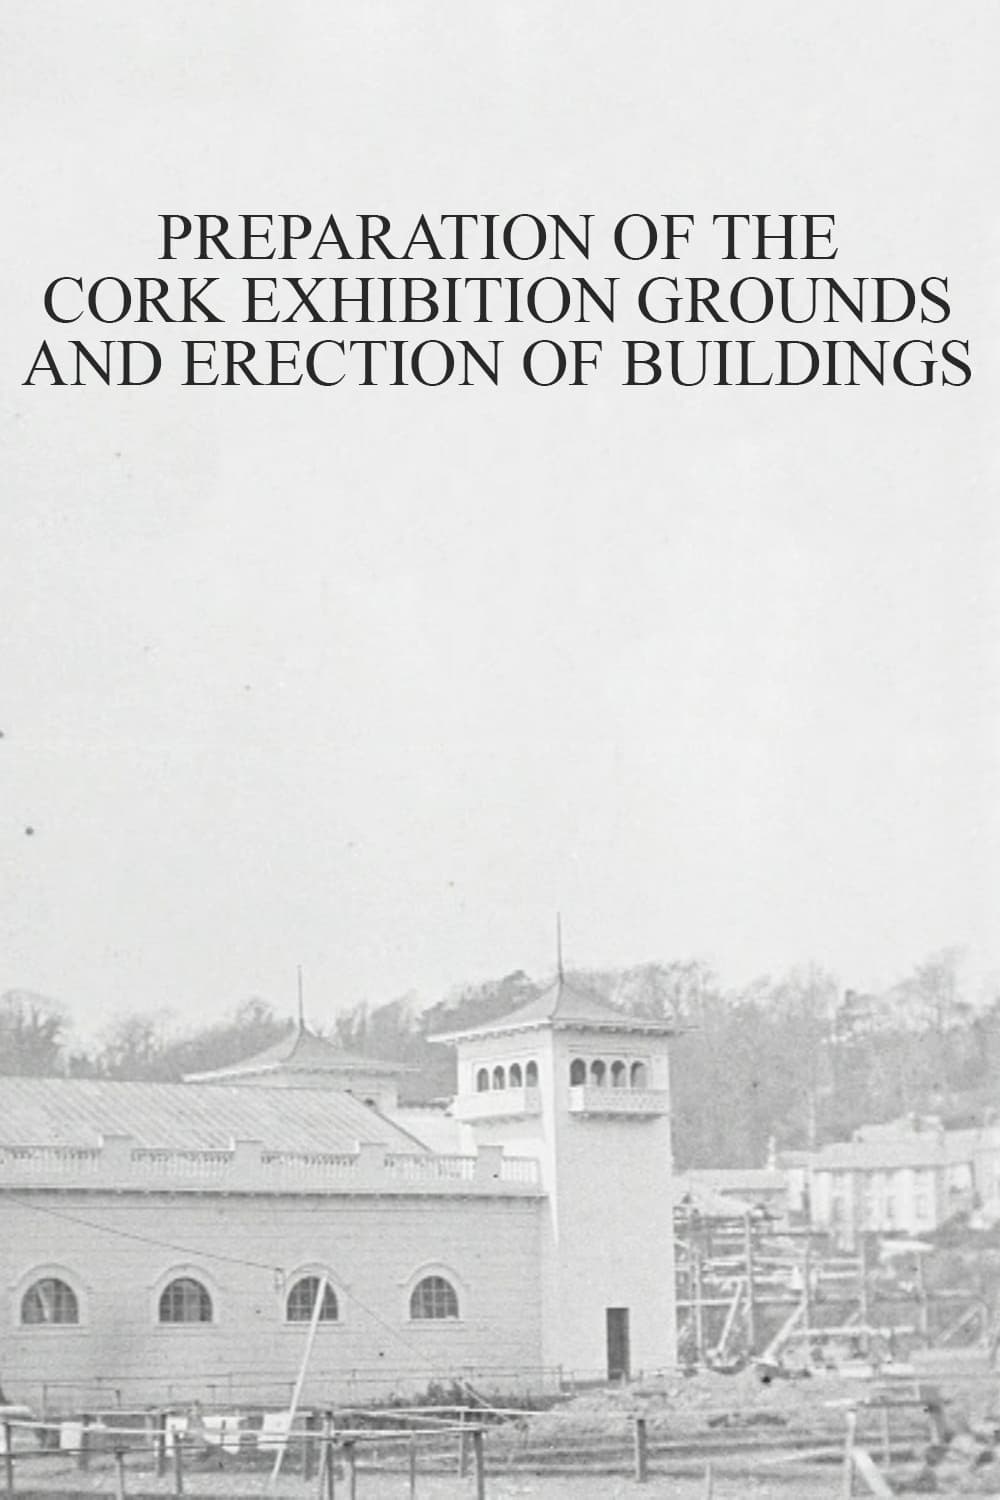 Preparation of the Cork Exhibition Grounds and Erection of Buildings